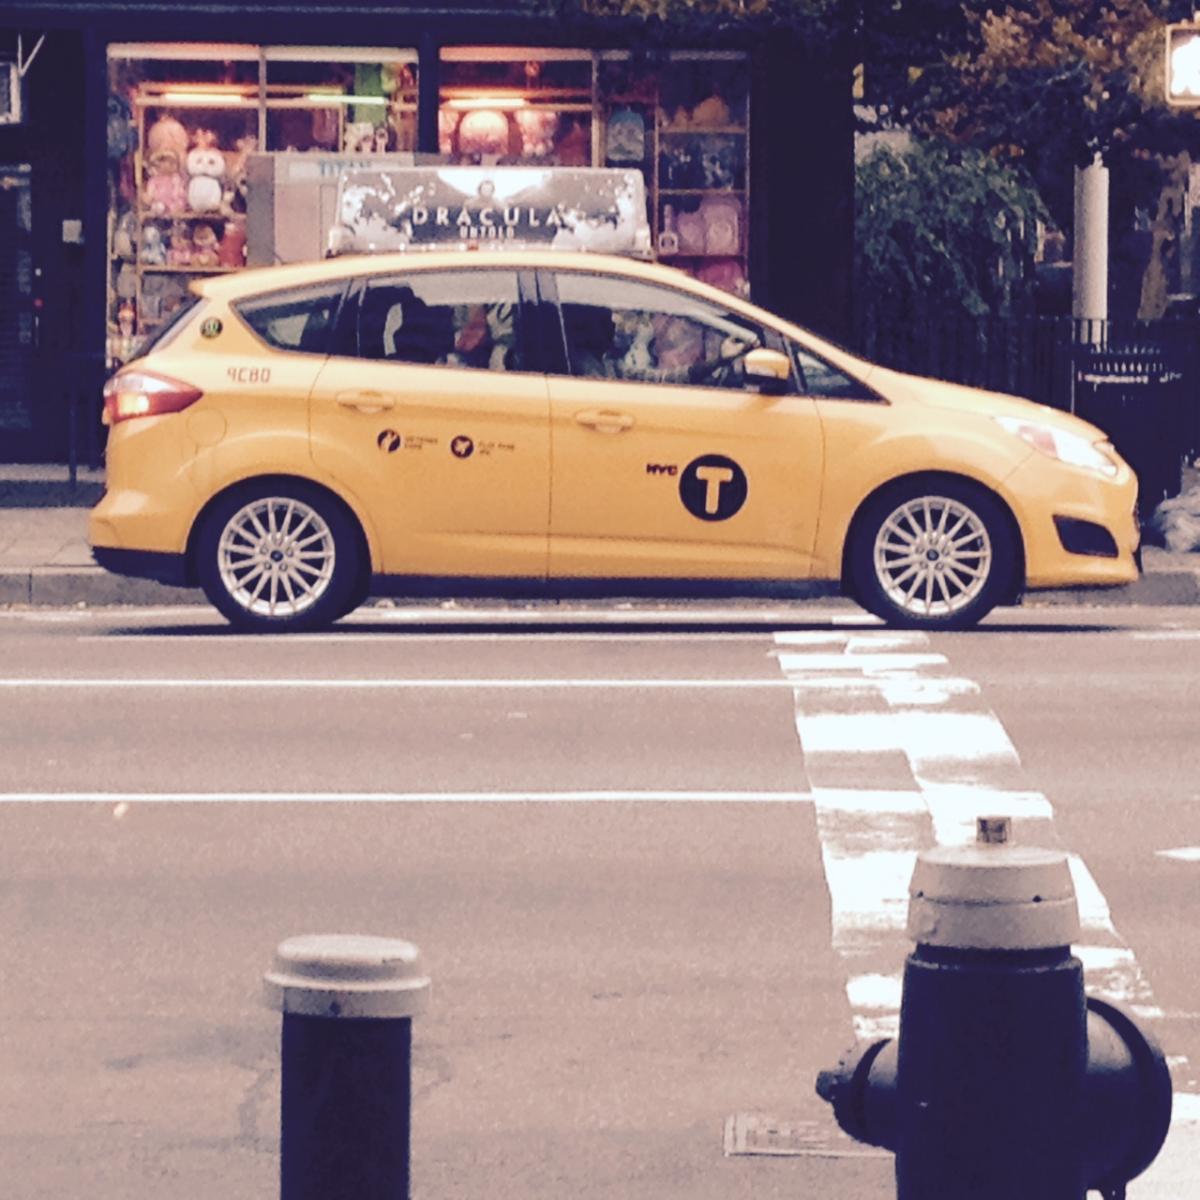 Ford C-MAX Taxicab in NYC sighted 10-19-2014 post-383-0-47712700-1413771127.jpg